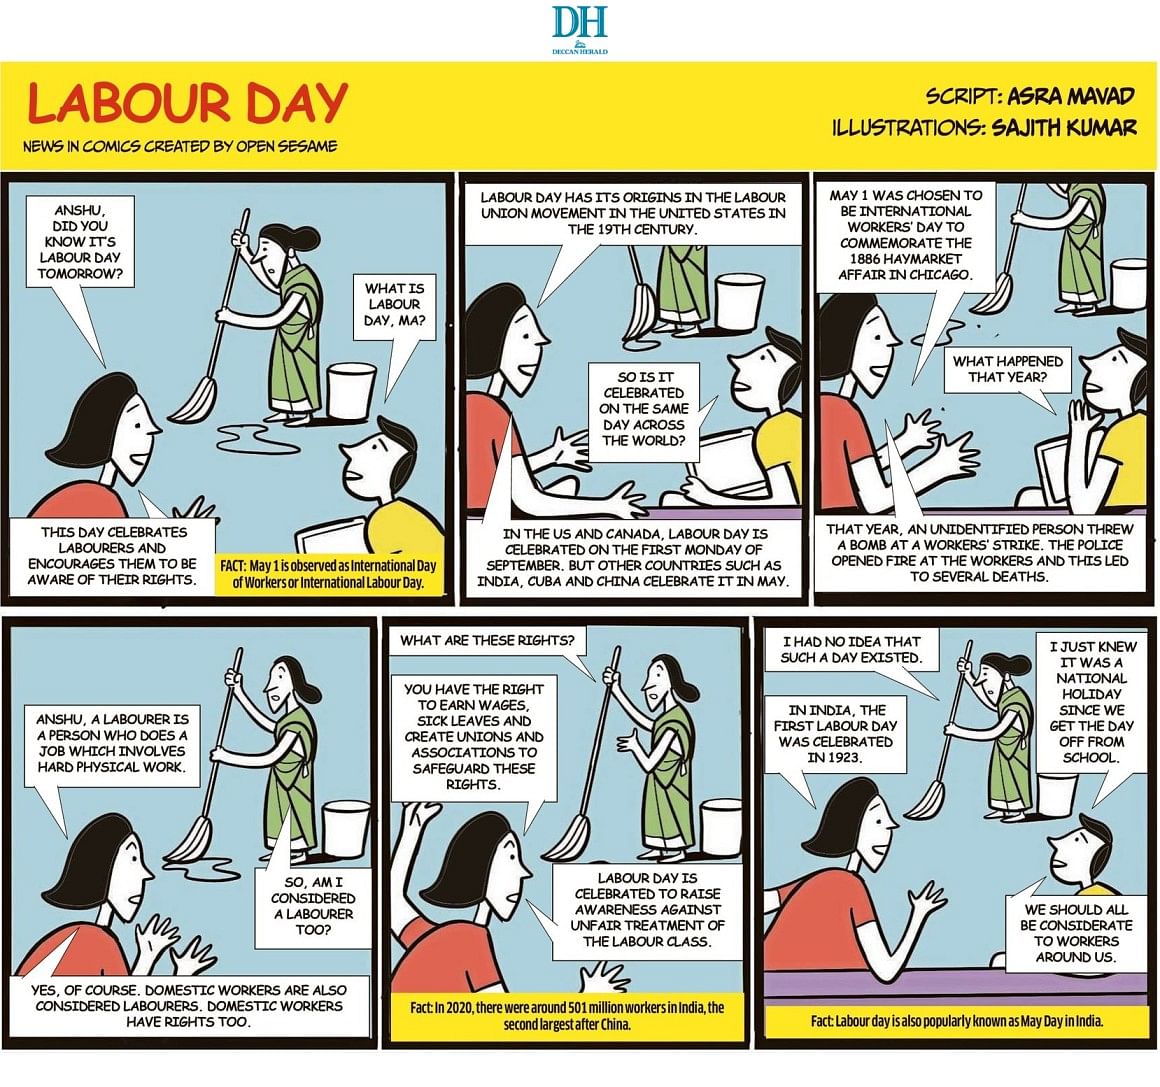 Open Sesame | What is Labour Day?